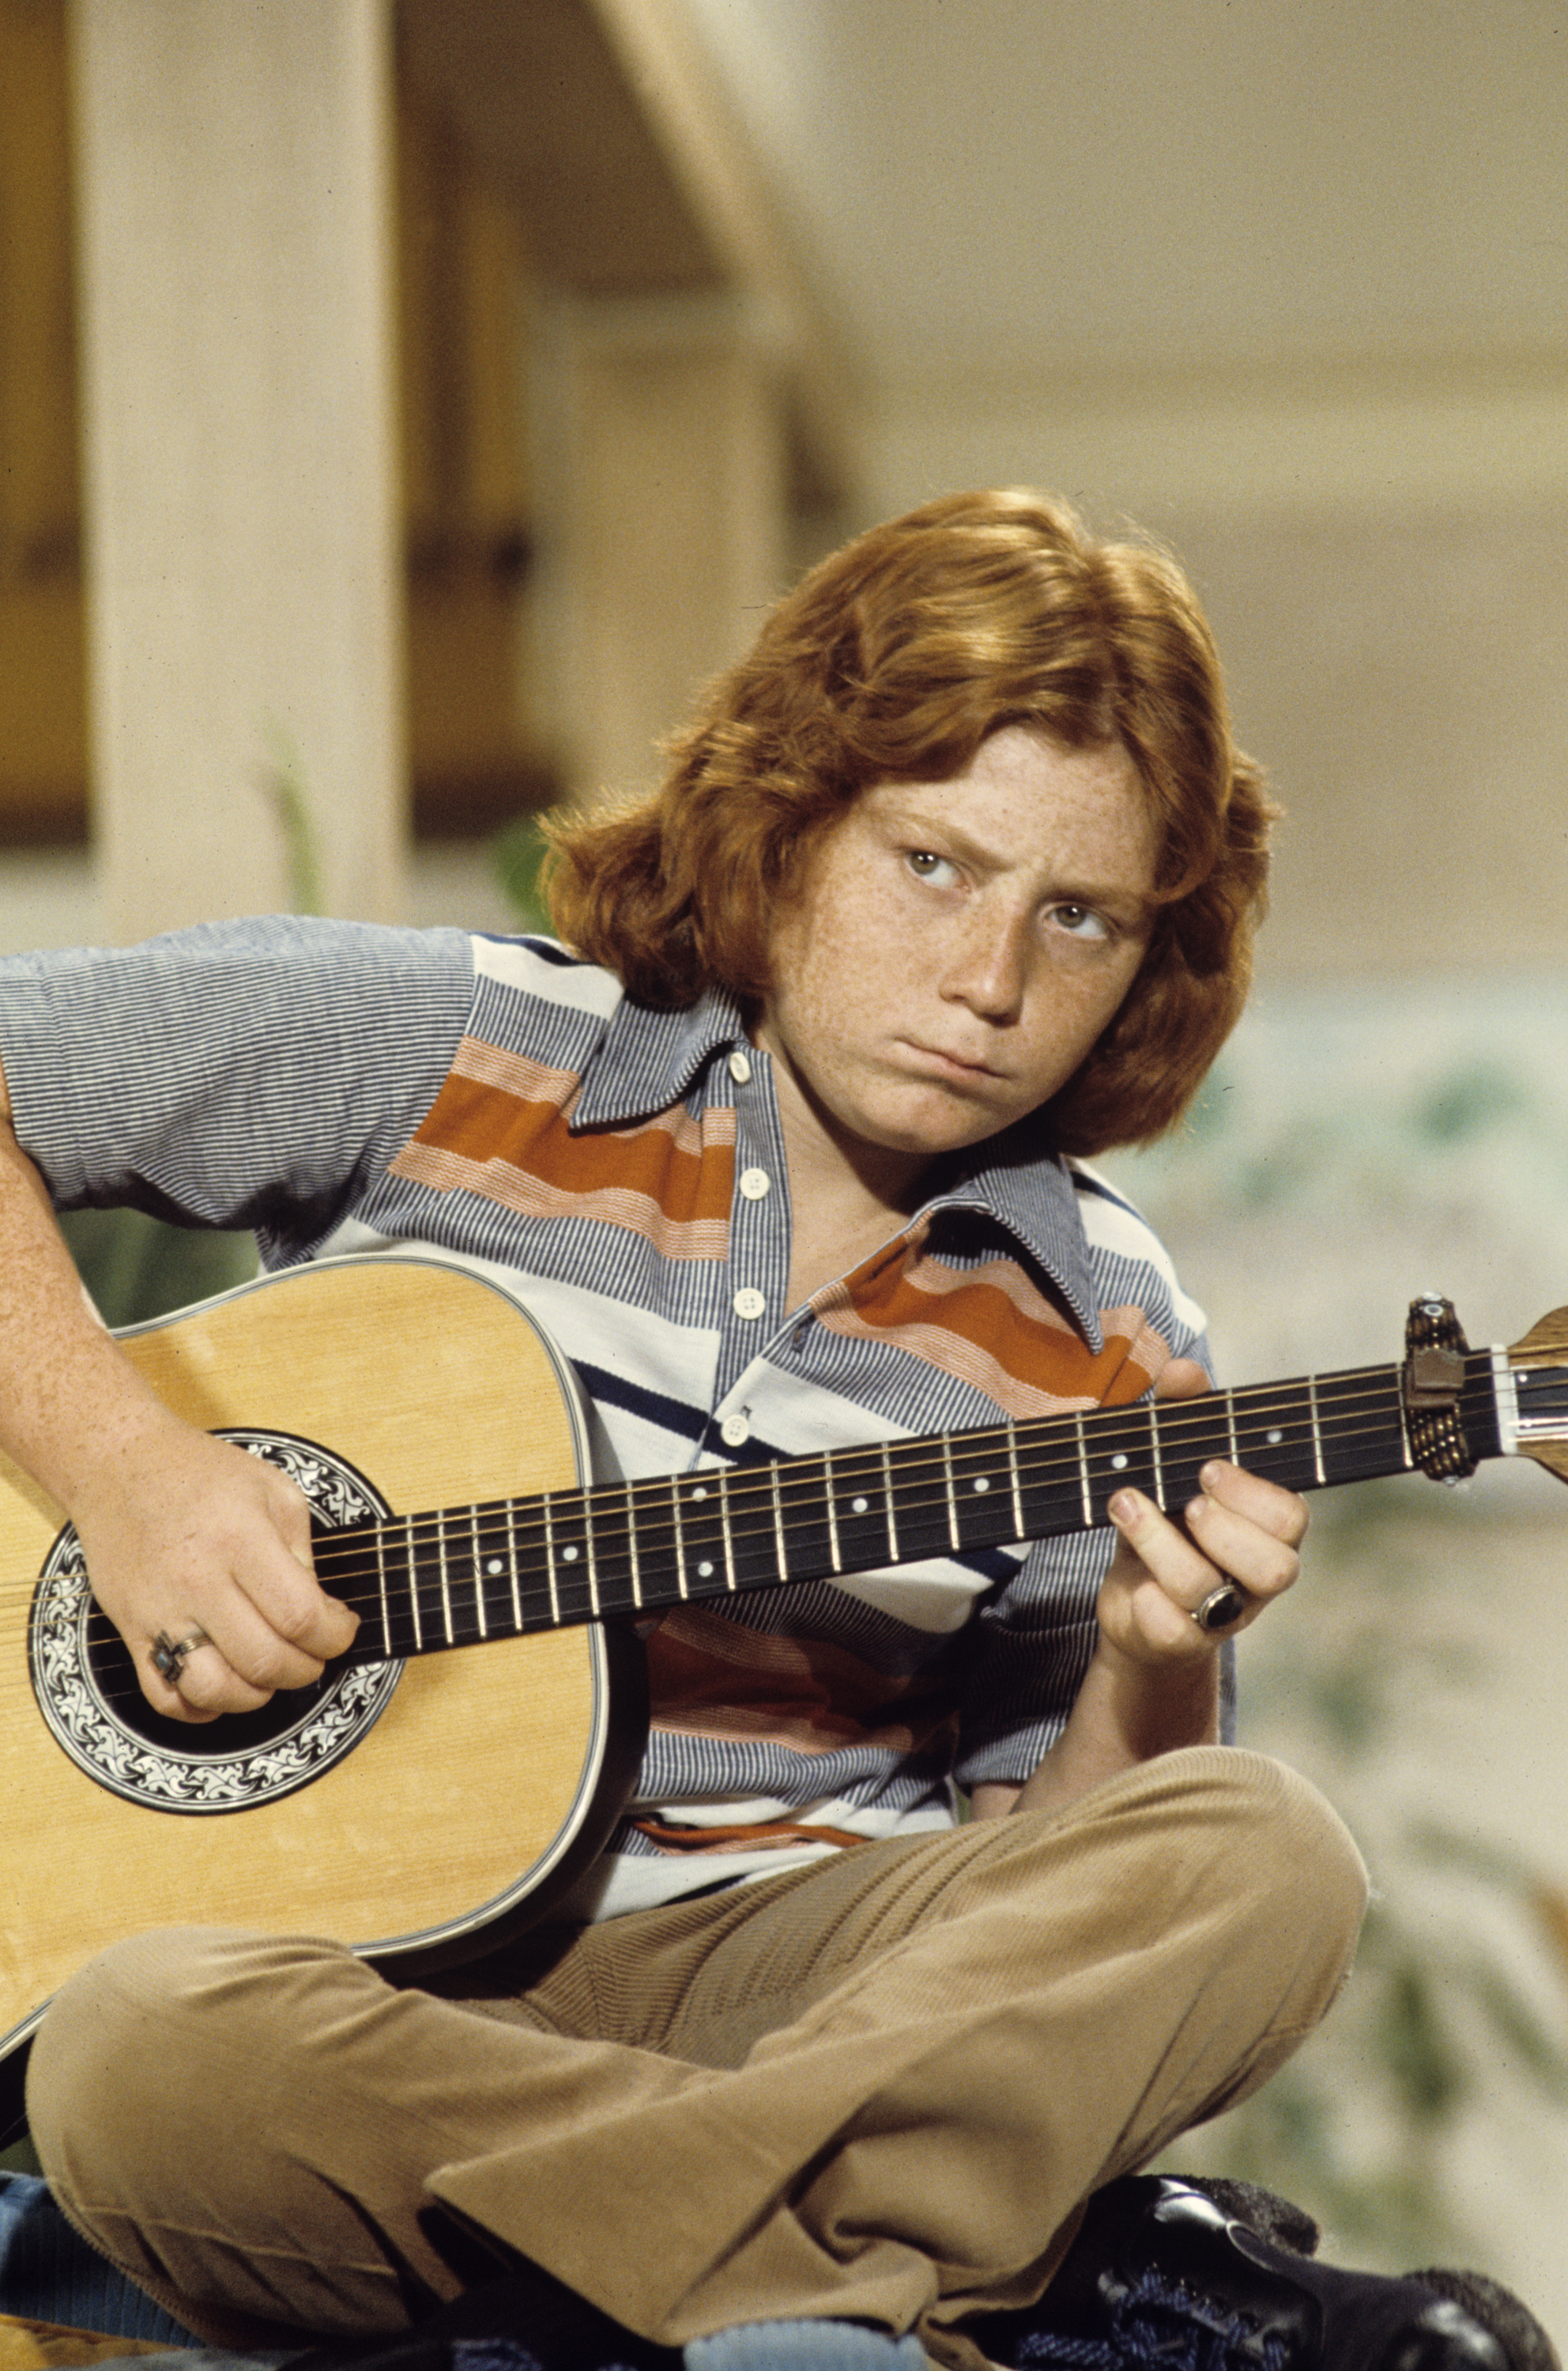 Danny Bonaduce on the set of "The Partridge Family" in 1970 | Source: Getty Images